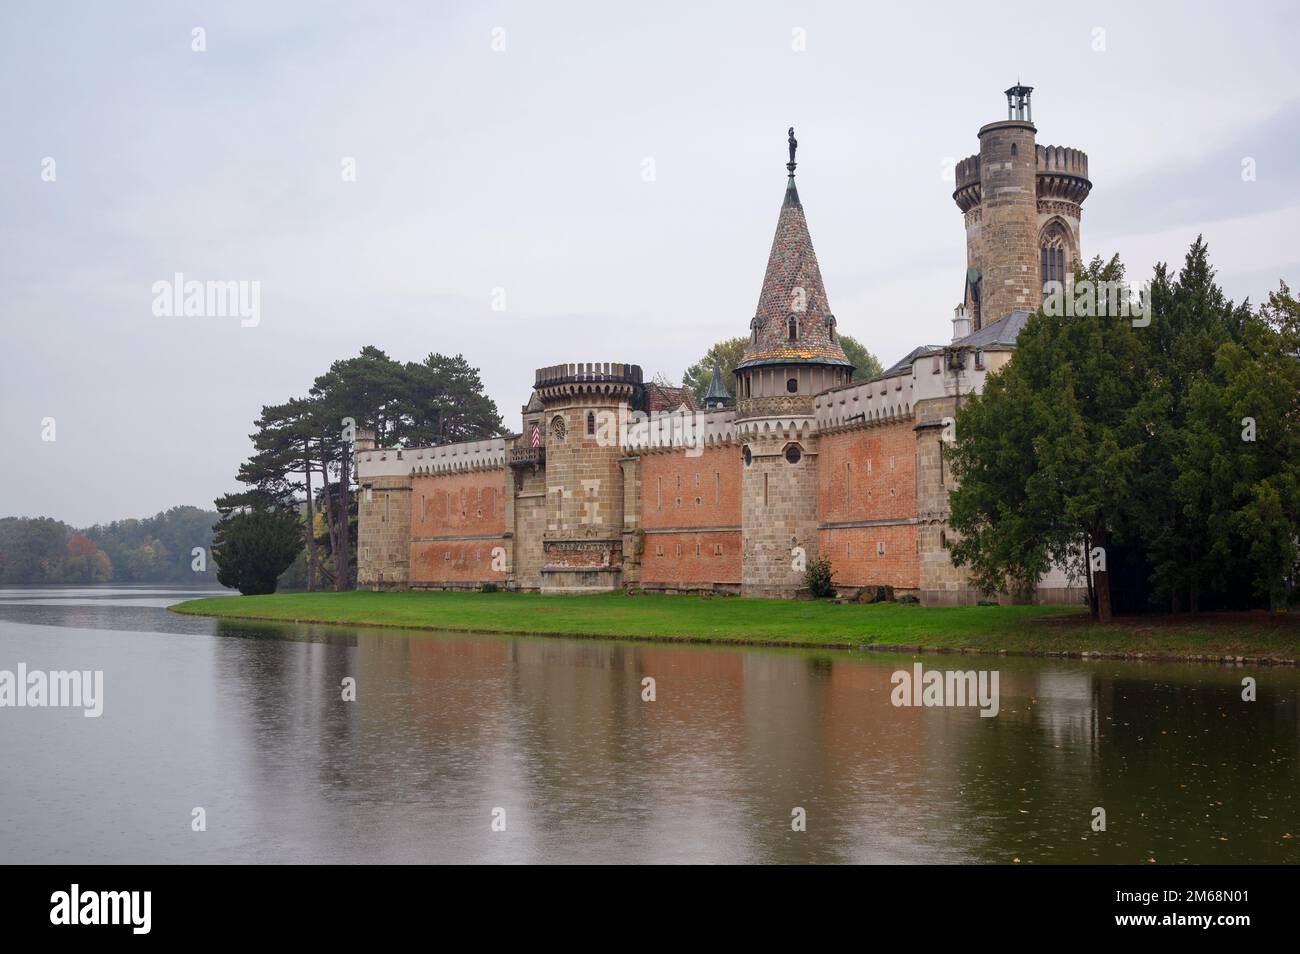 15th october,2022.View of the Laxenburg castle at the town of Laxenburg, Austria. Stock Photo